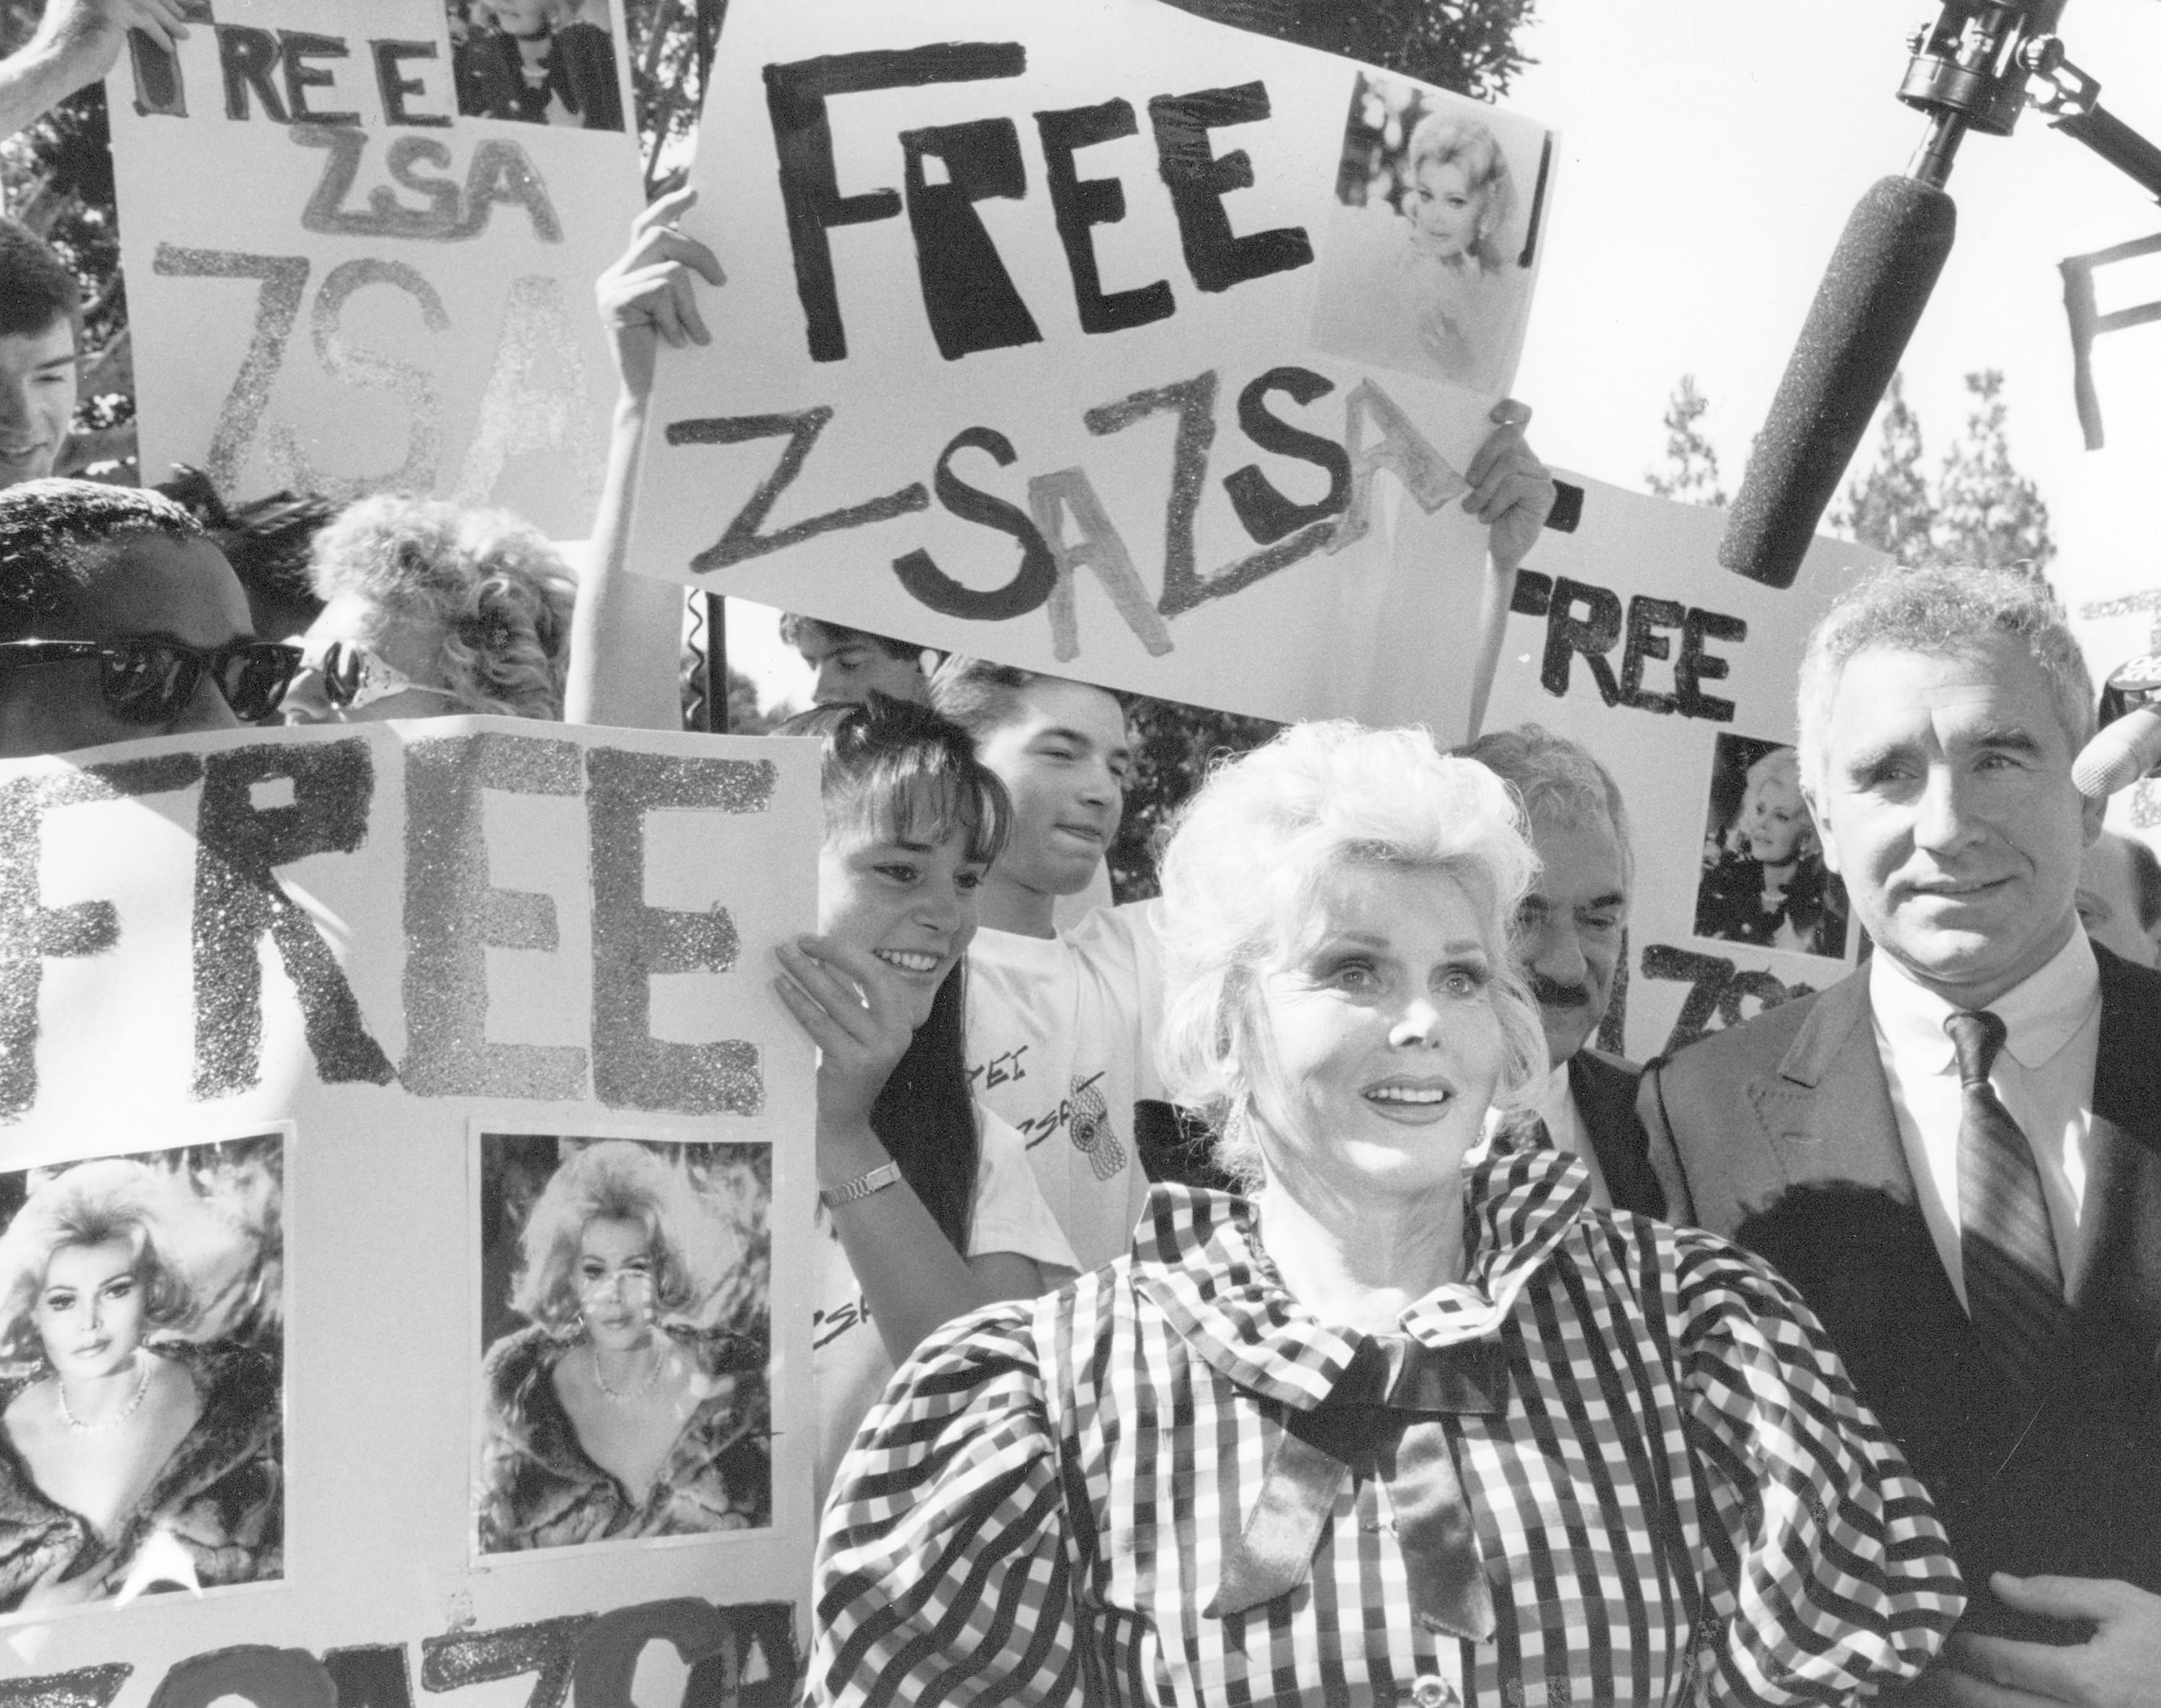 A 1989 staff file photo of Zsa Zsa Gabor arriving at court with husband, Prince Frederick von Anhalt, right, as fans show their support.